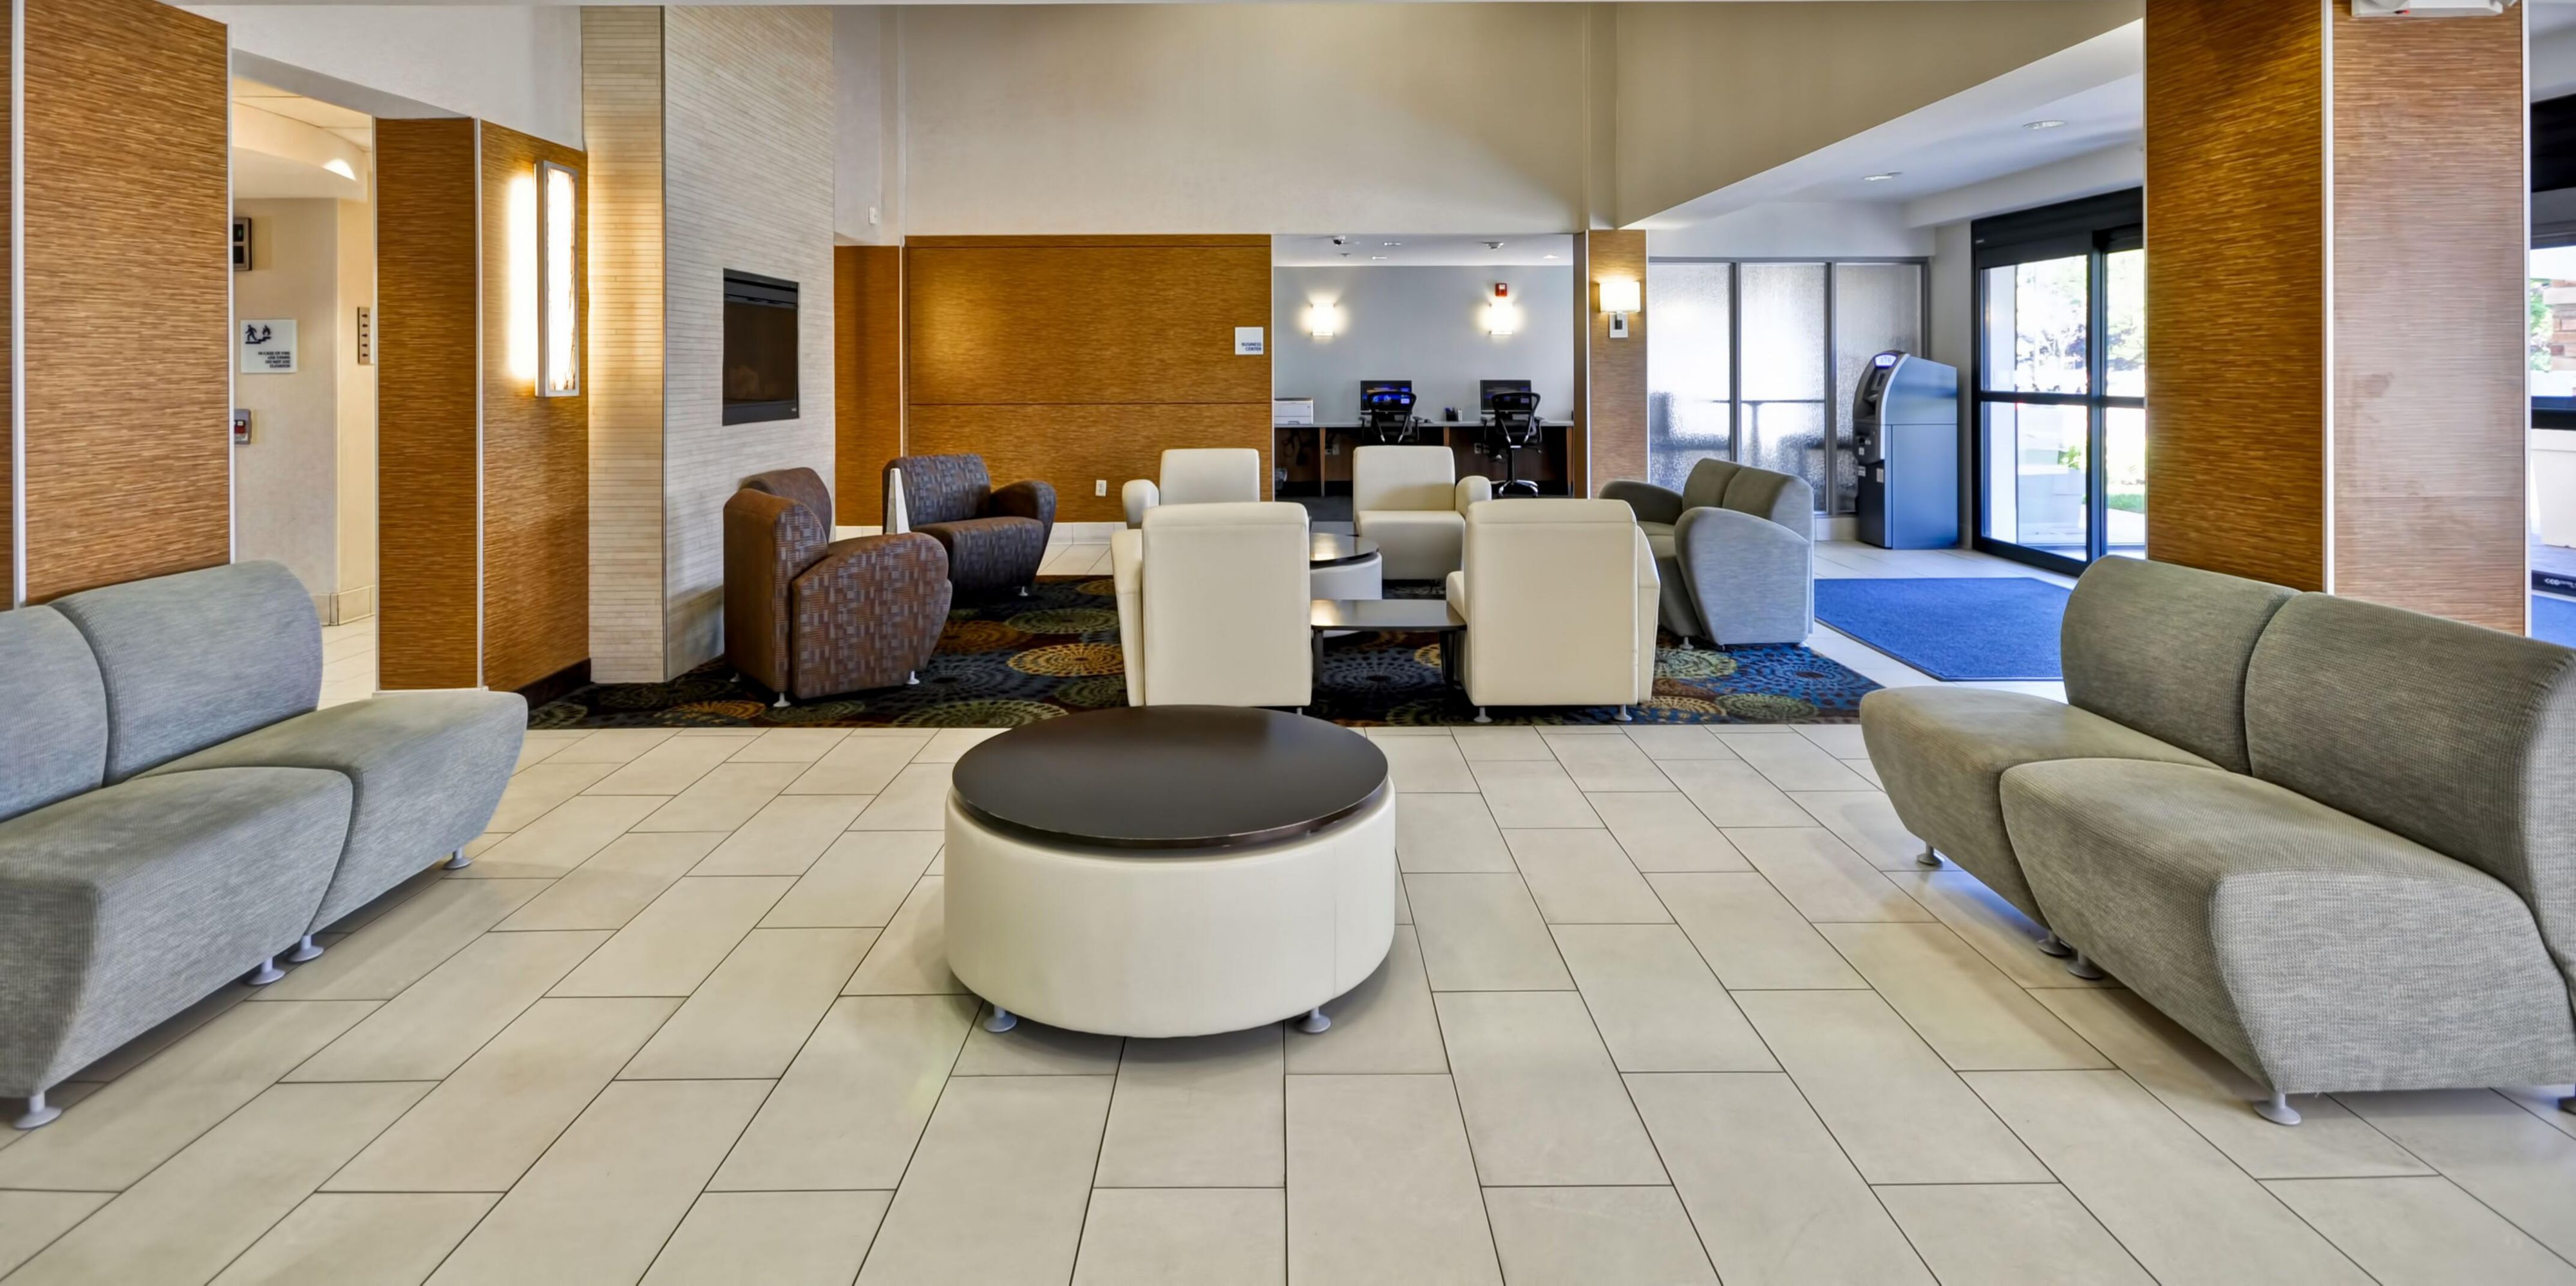 Our speedy Wi-Fi service will keep you connected to your favorite shows, social media apps, and workspaces. No need to use your data when you stay at our Detroit airport hotel!